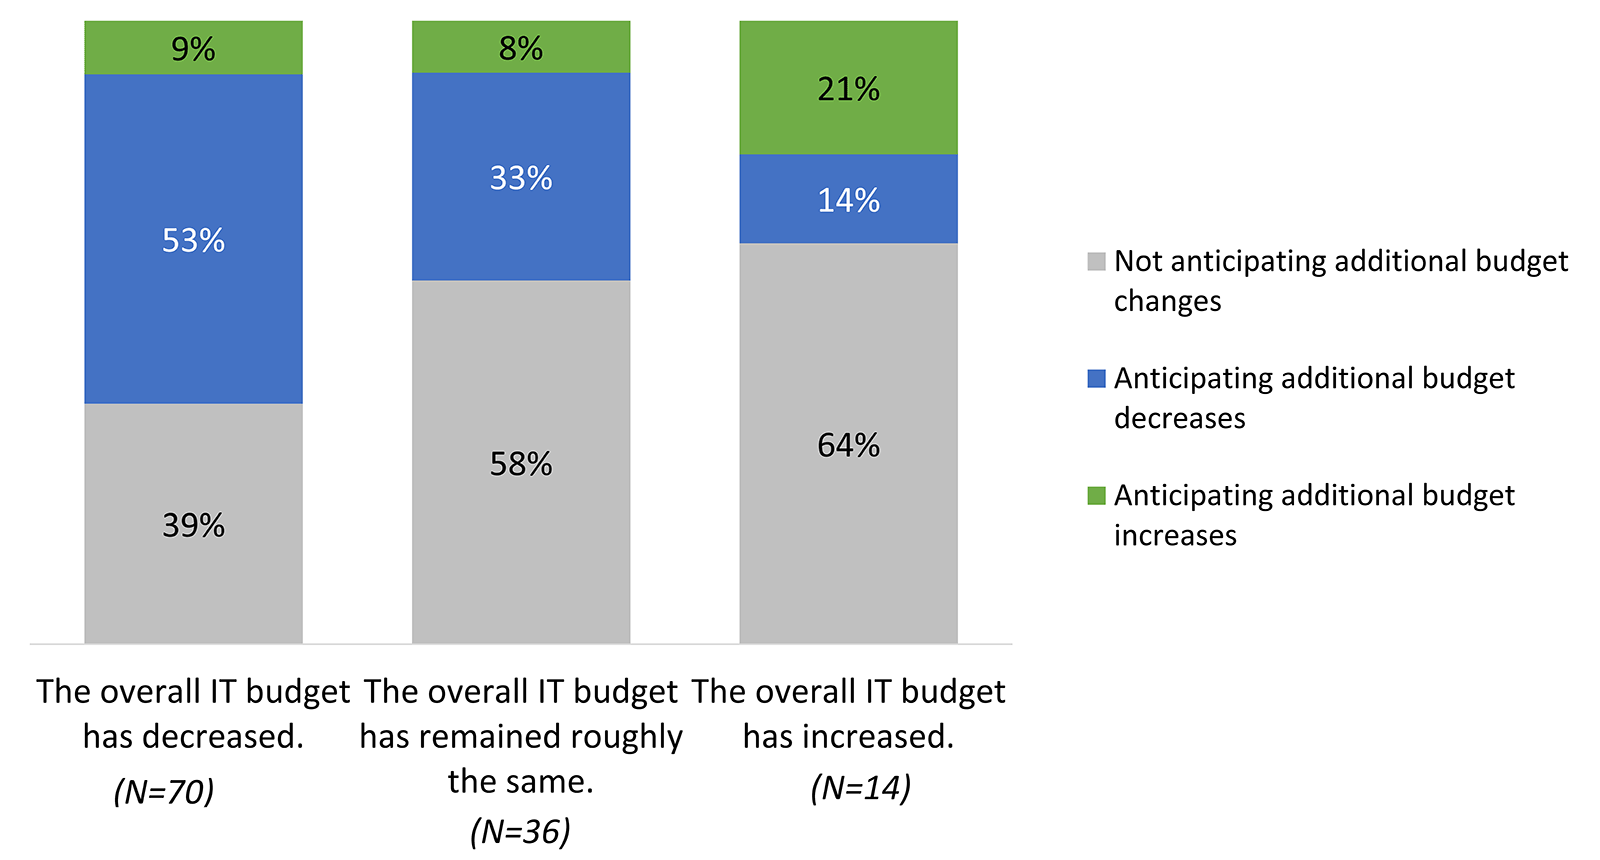 stacked bar chart showing the percentage of respondents anticipating additional budget changes. (No)t anticipating additional budget changes, Anticipaing additional budget (D)ecreases, Anticipating additional budget (I)ncreases.
The overall IT budget has decreased (N=70) No 39%, D 53%, I 9%.
The overall IT budget has remained roughly the same (N=36) No 58%, D 33%, I 8%.
The overall IT budget has increased (N=14) No 64%, D 14%, I 21%.